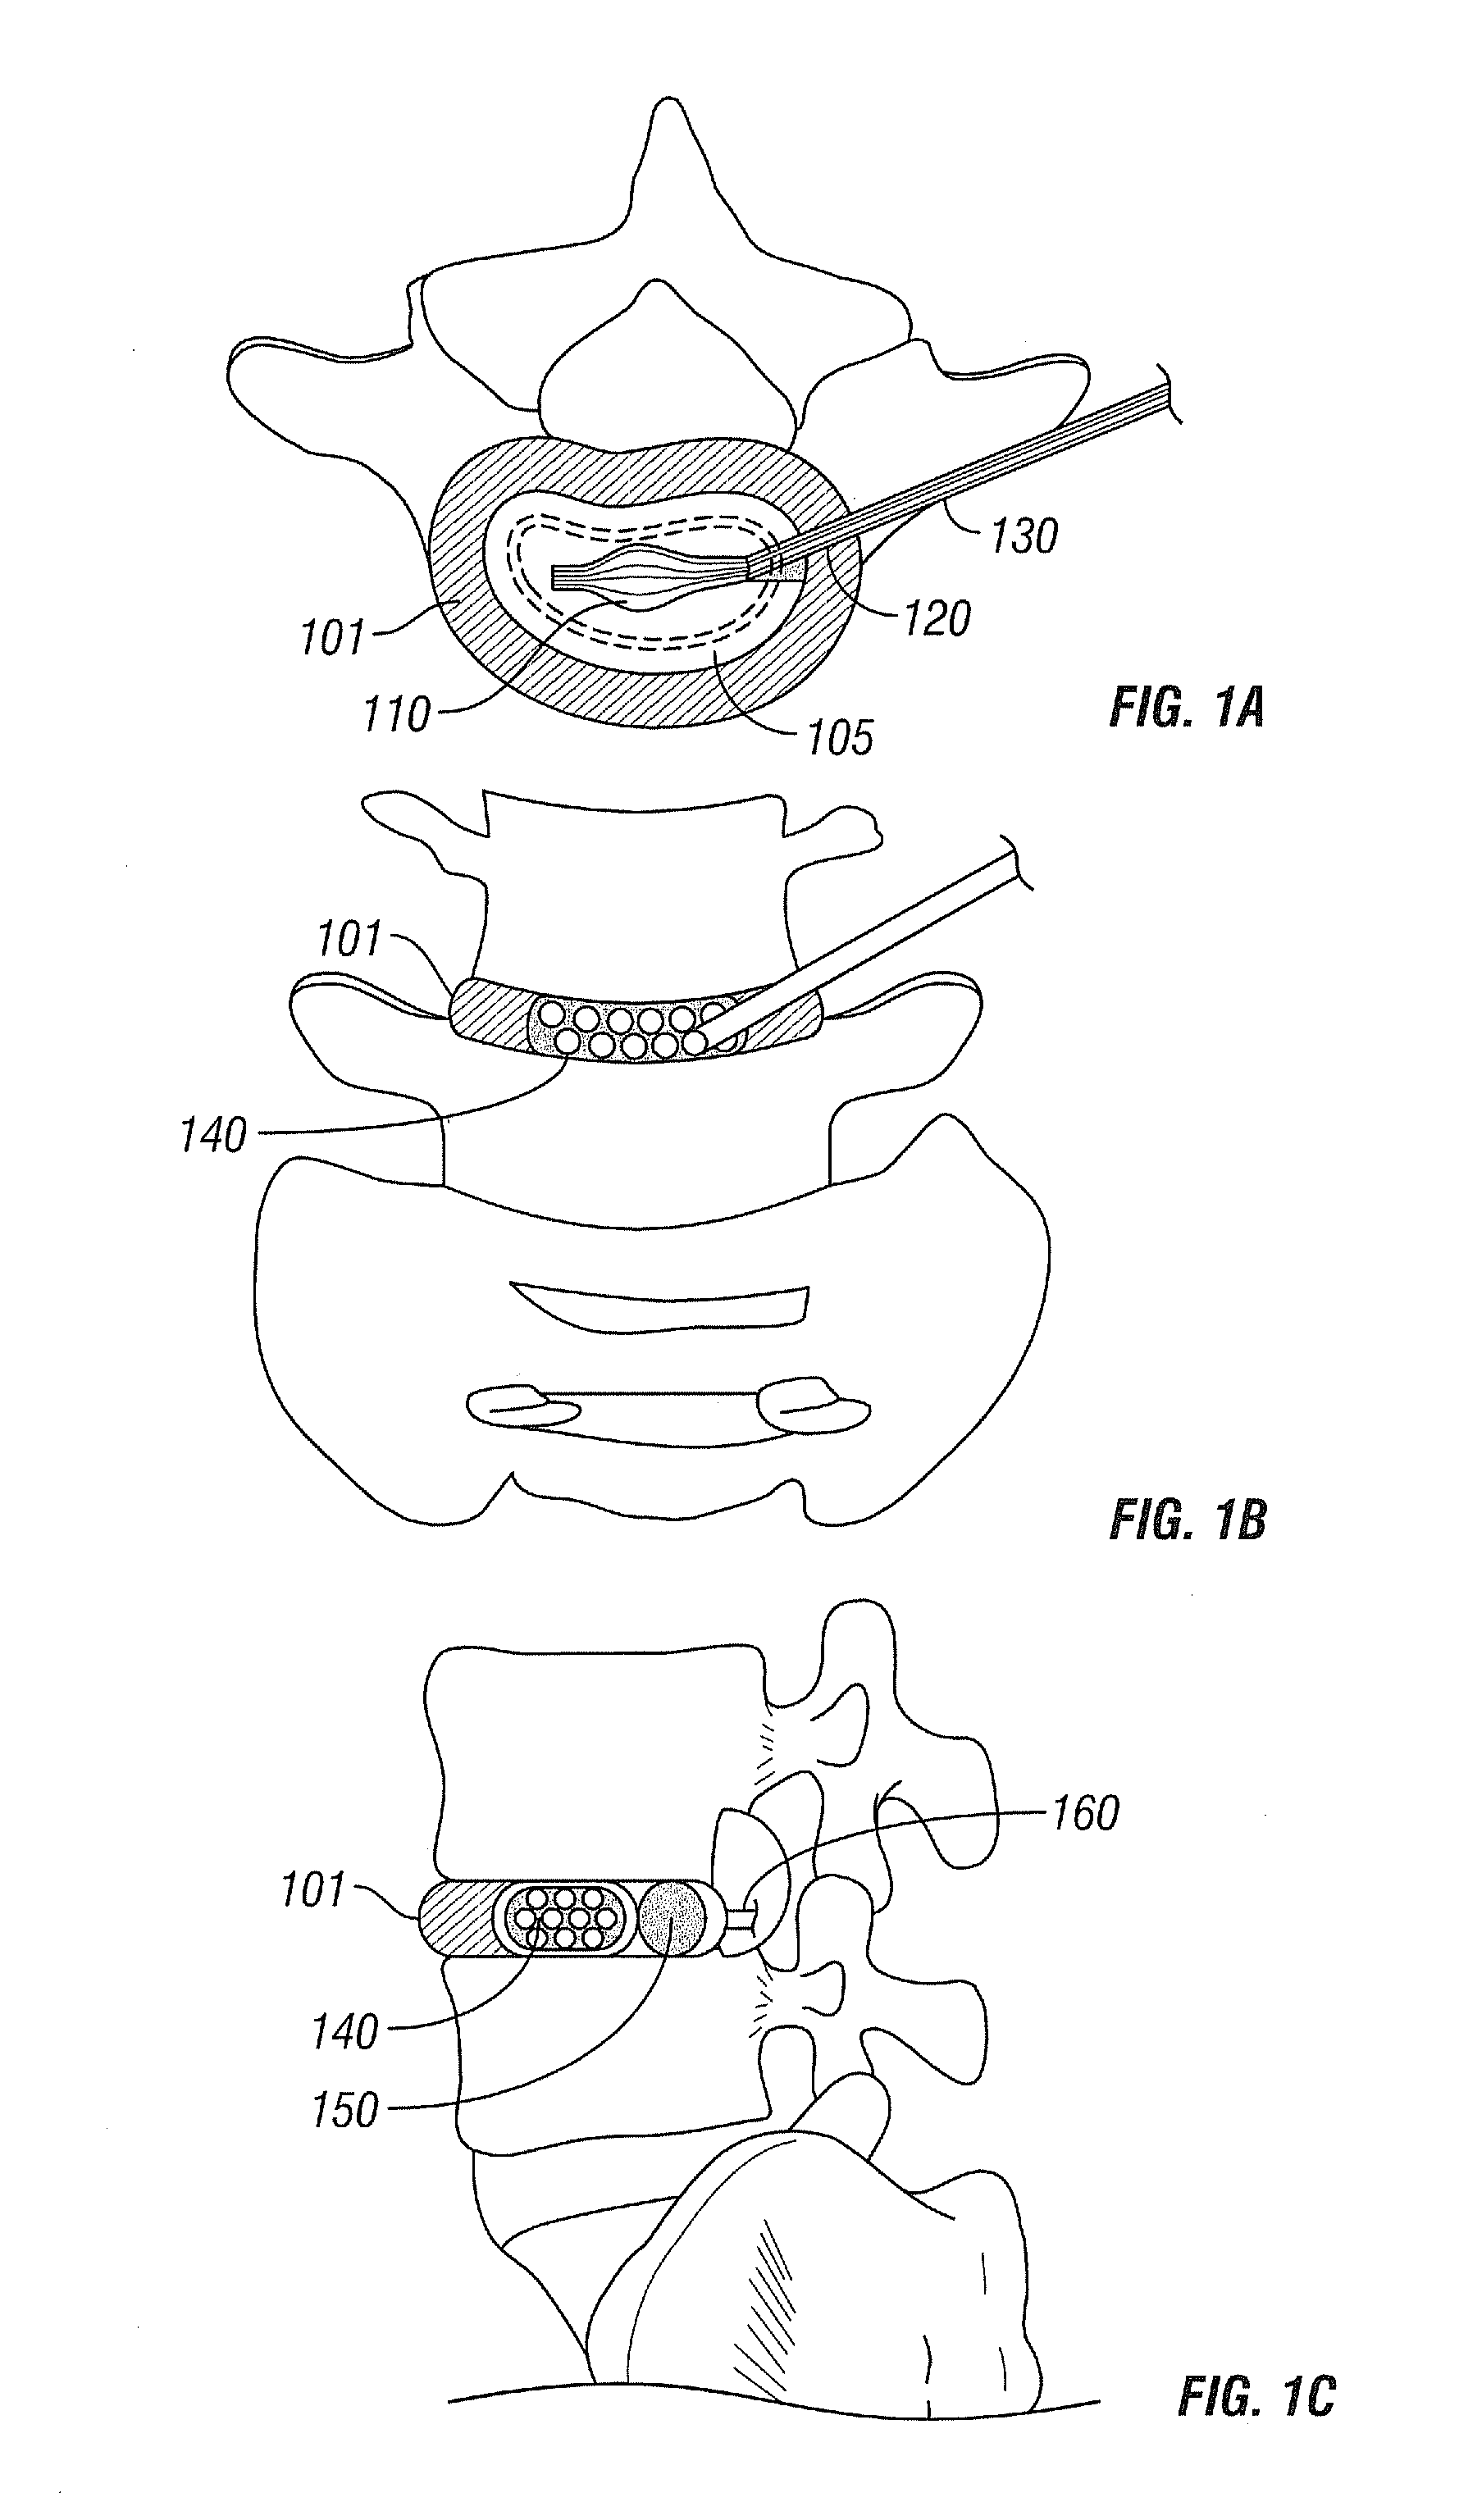 Intervertebral Nucleus and Annulus Implants and Method of Use Thereof